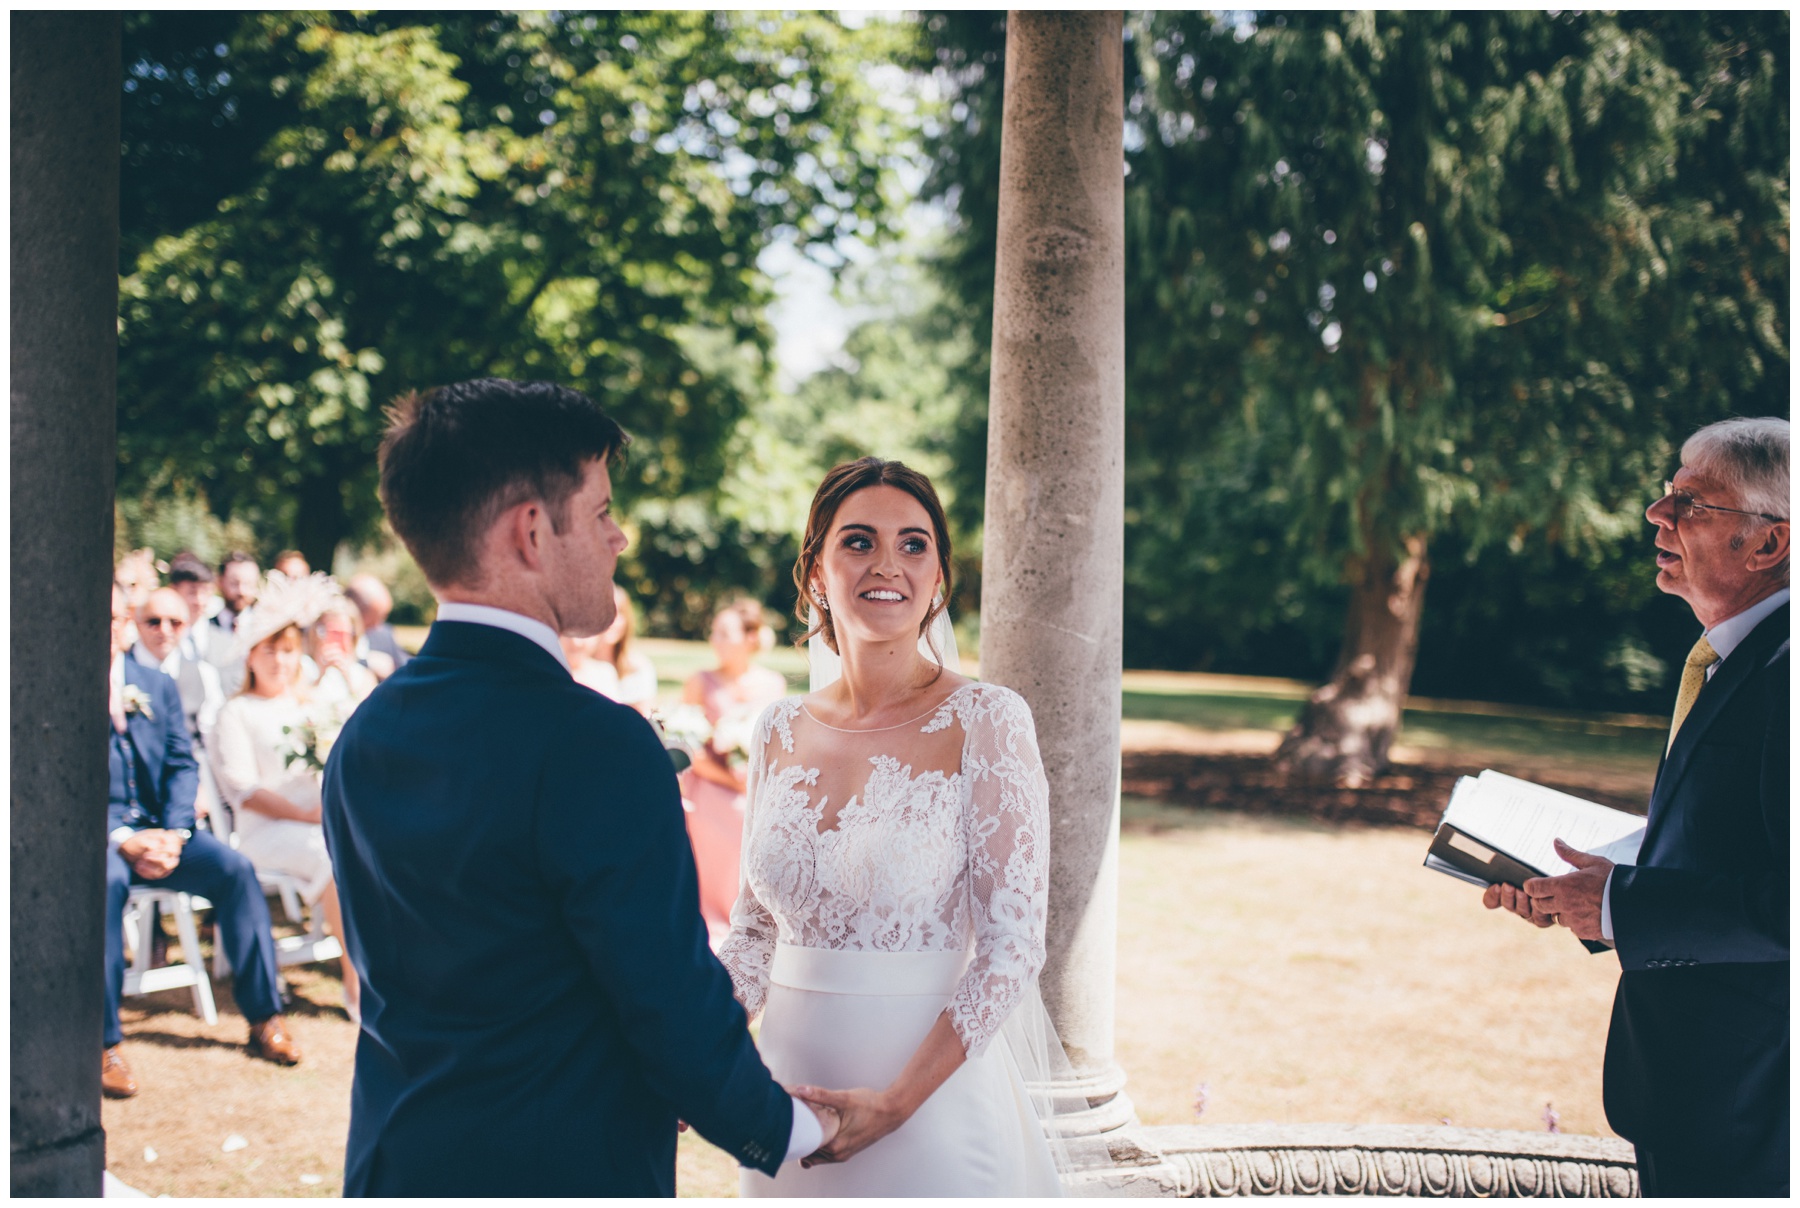 Stunning outdoor wedding ceremony at Tilstone House in Cheshire.